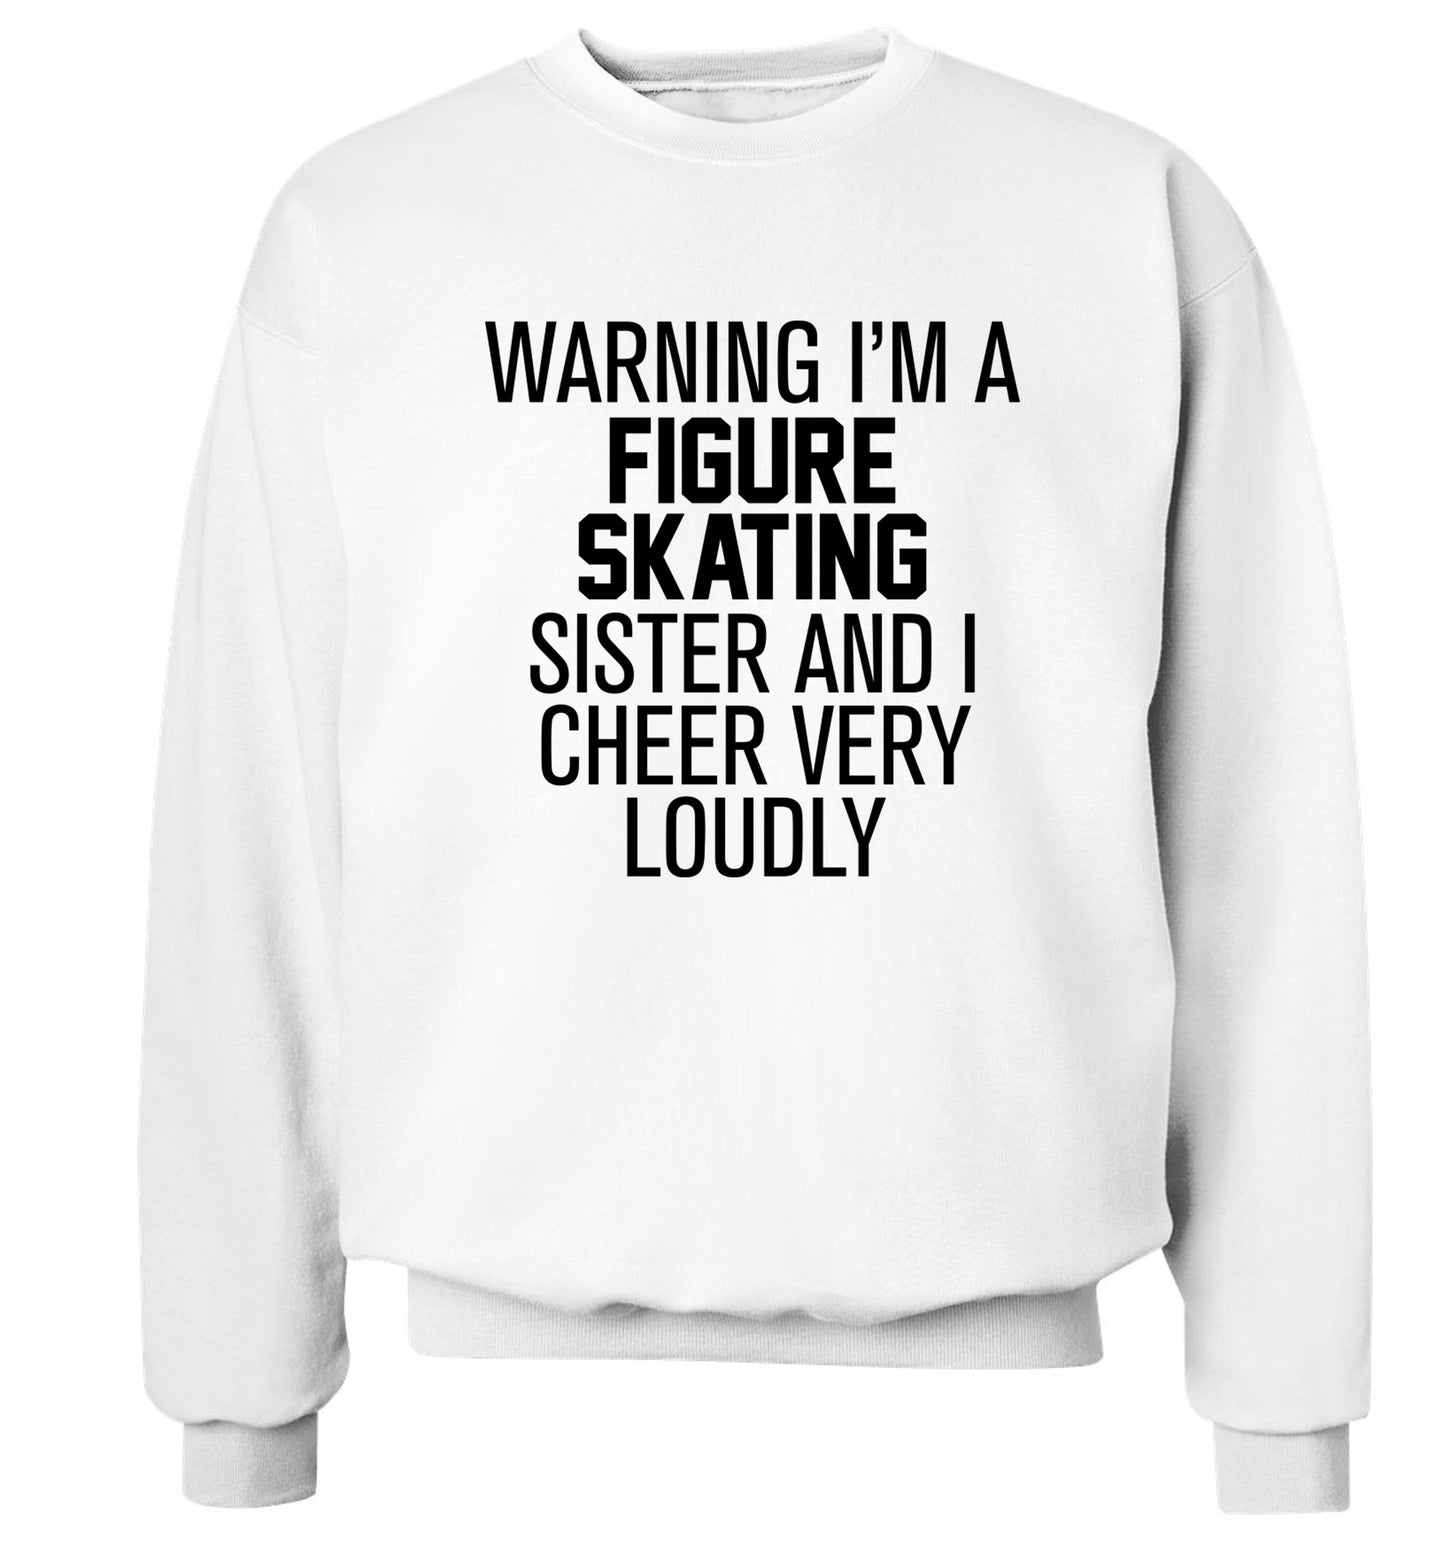 Warning I'm a figure skating sister and I cheer very loudly Adult's unisexwhite Sweater 2XL